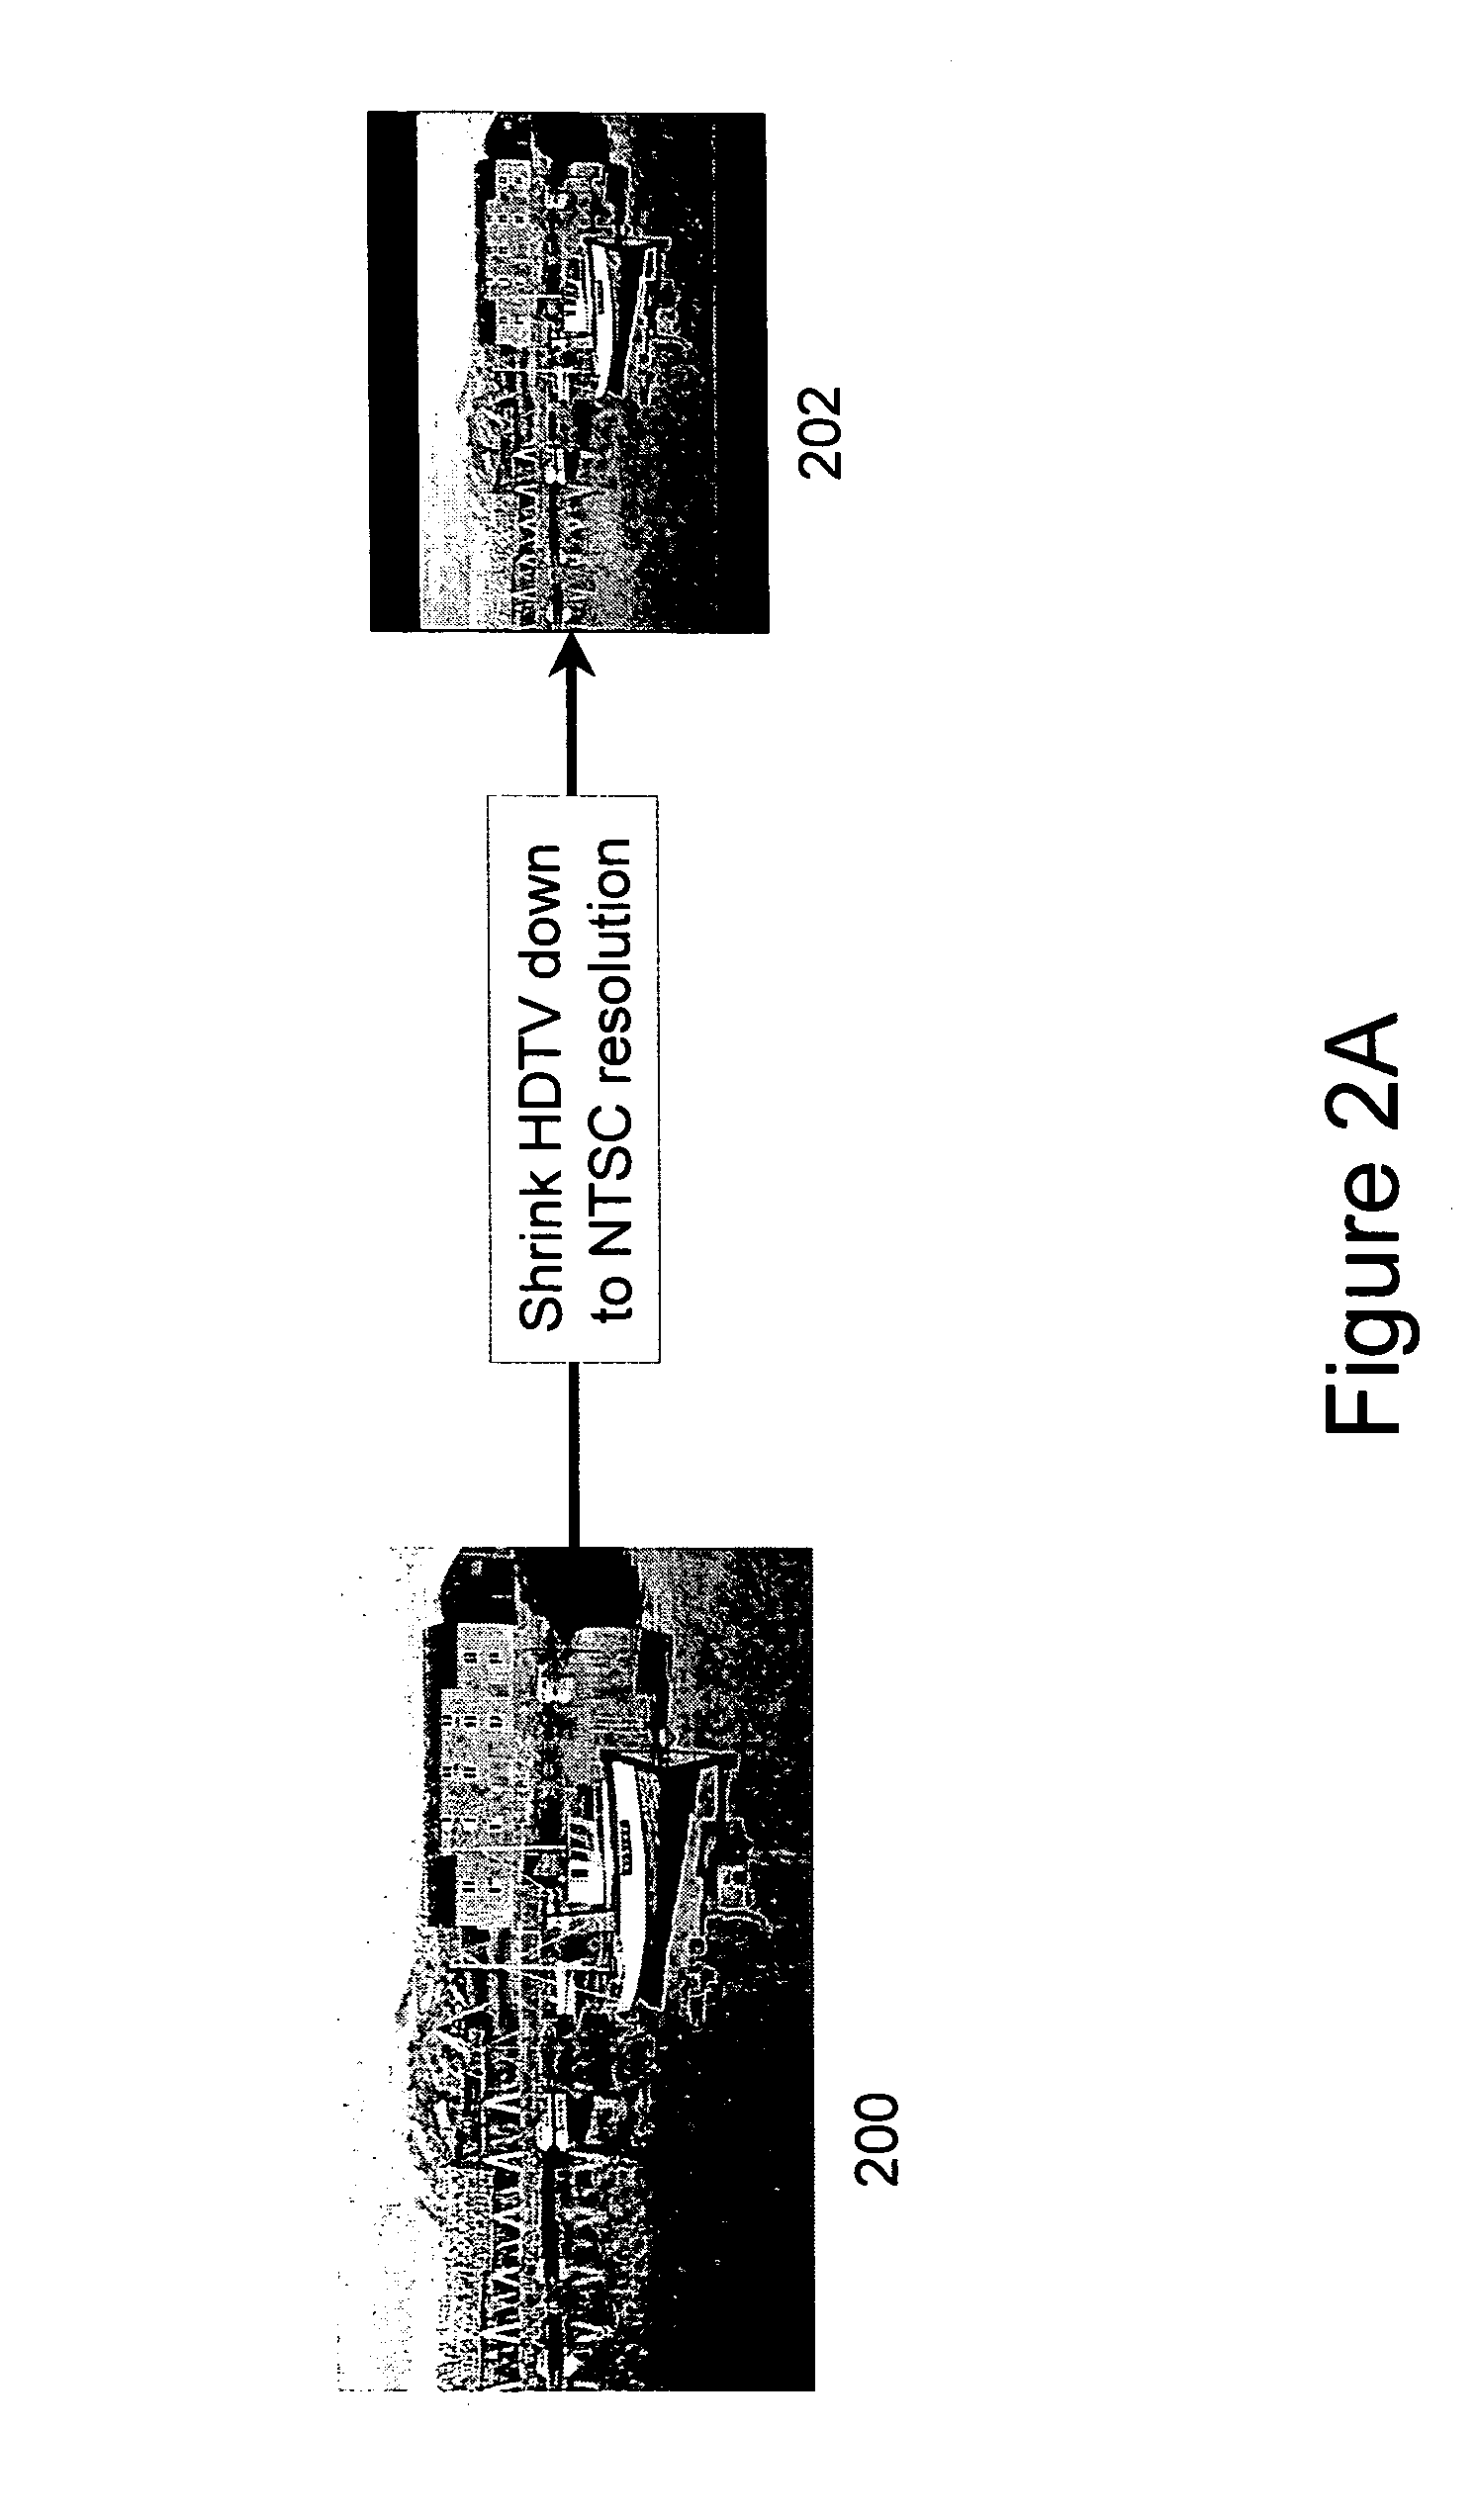 System and method for rapidly scaling and filtering video data